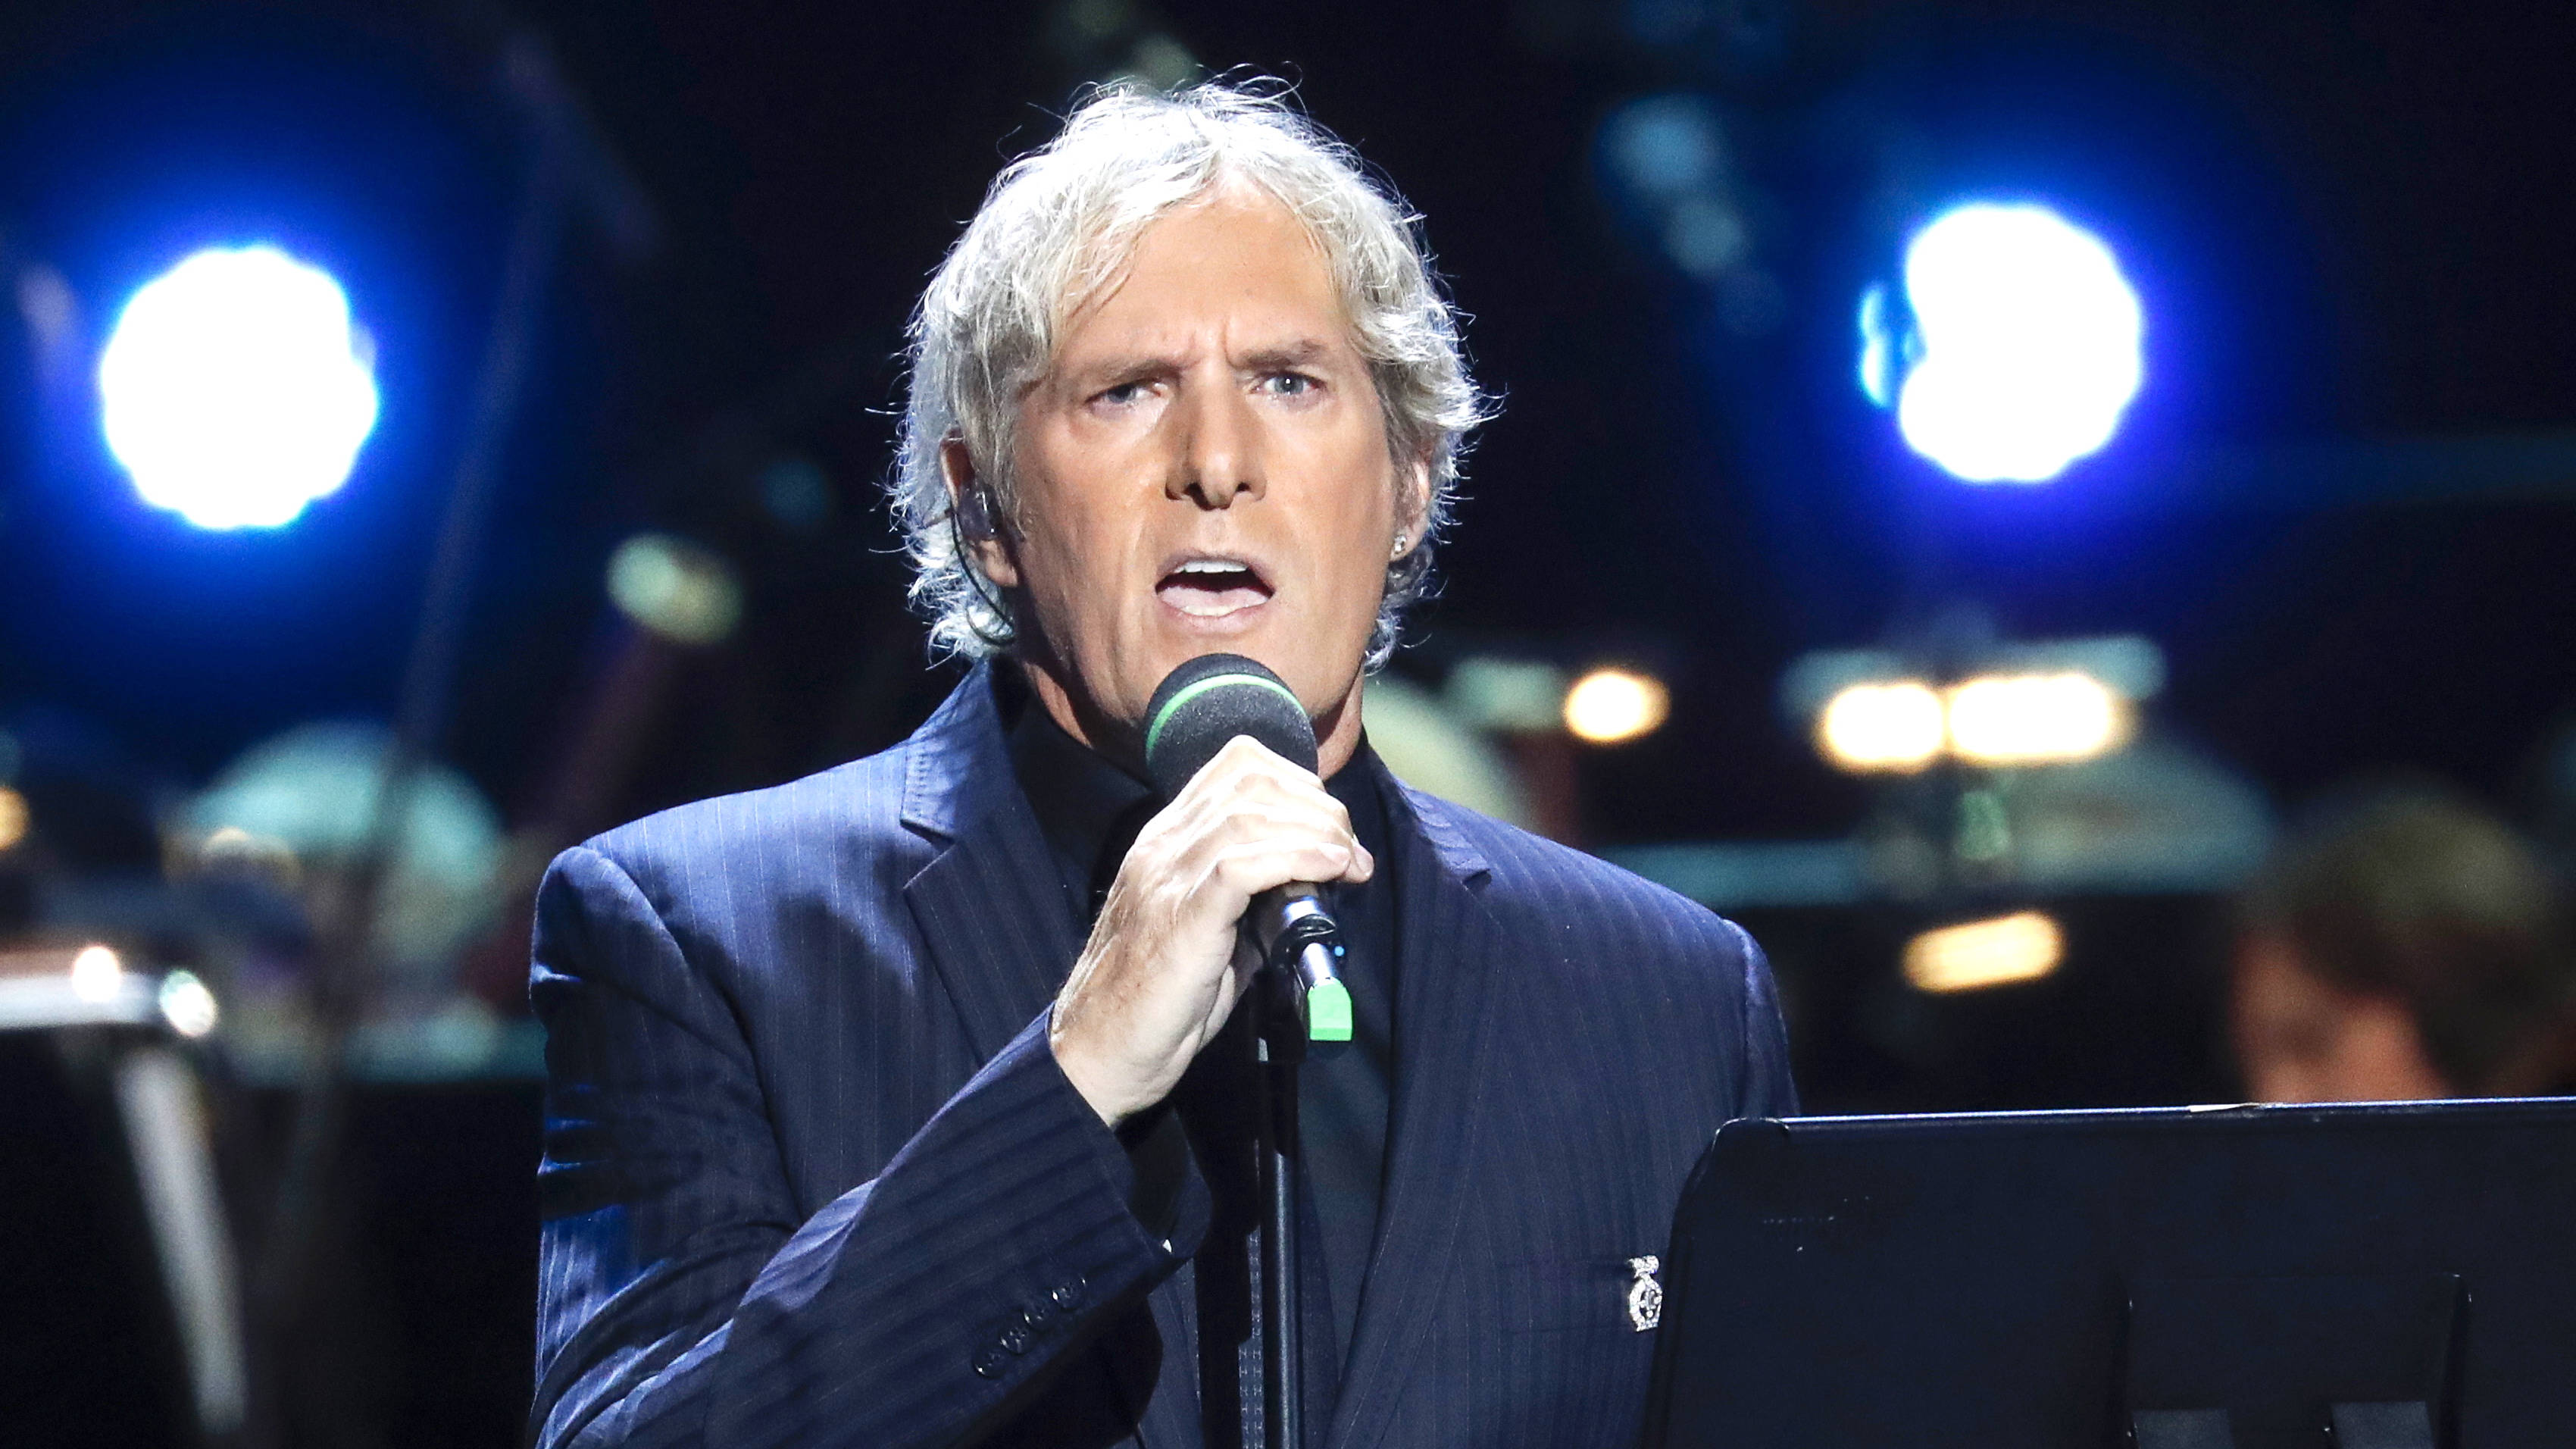 What Happened to American Singer Michael Bolton?